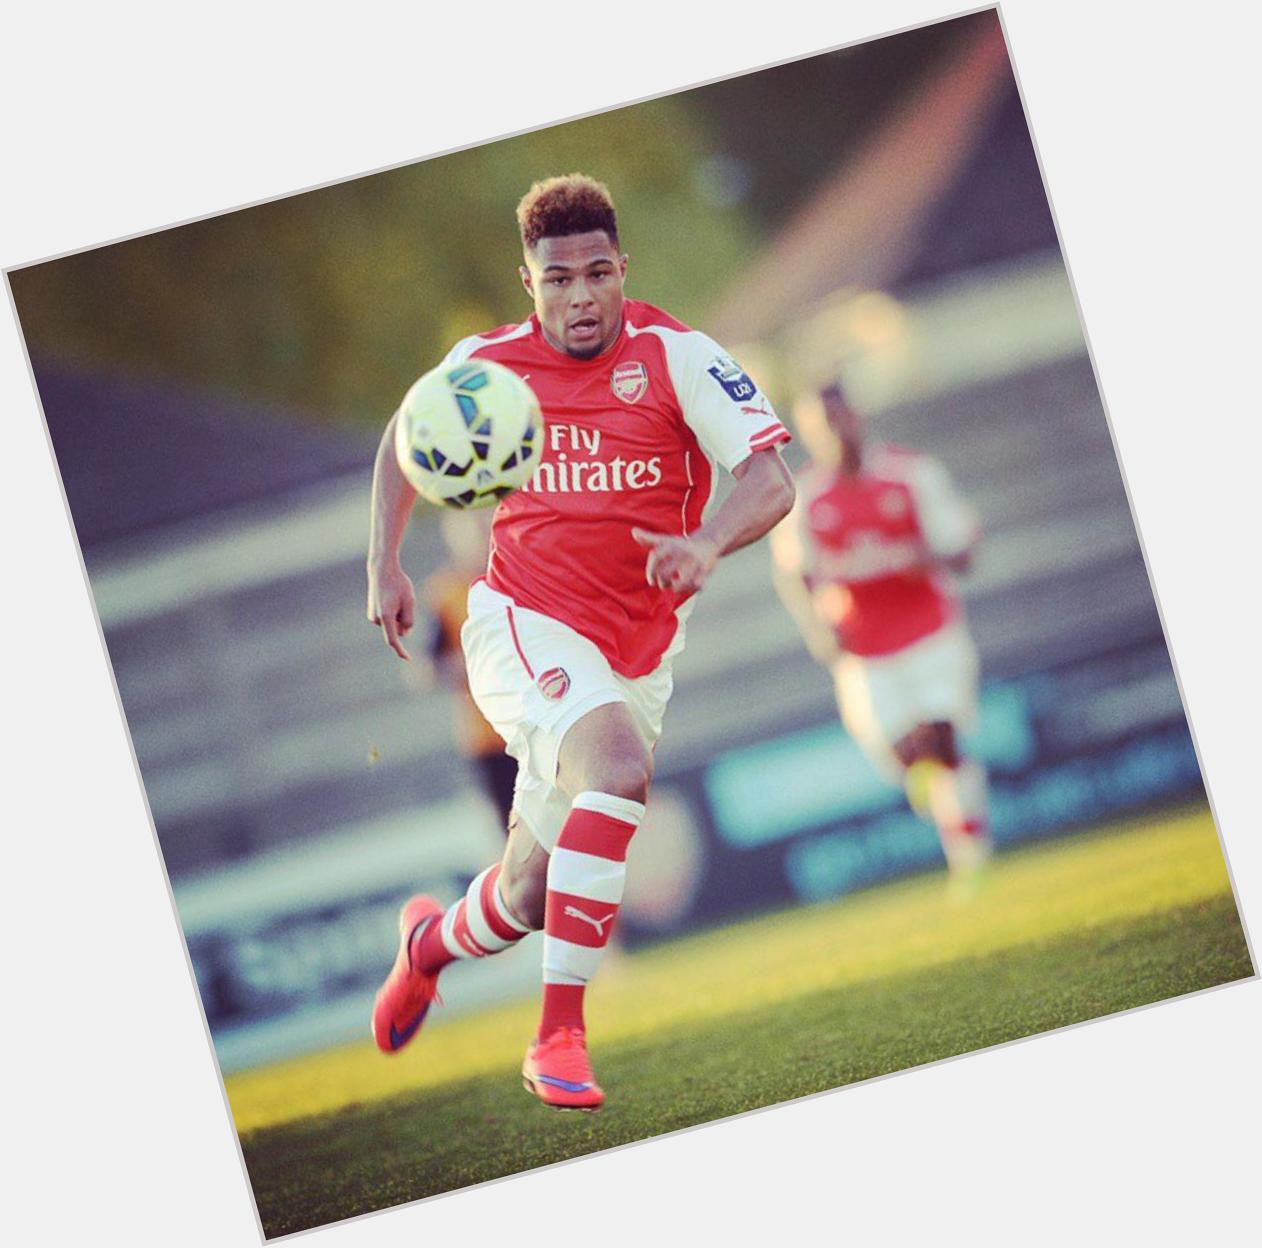 Happy 20th bday, Serge Gnabry. A brilliant player with a bright future. You know you are better than Sterling! 